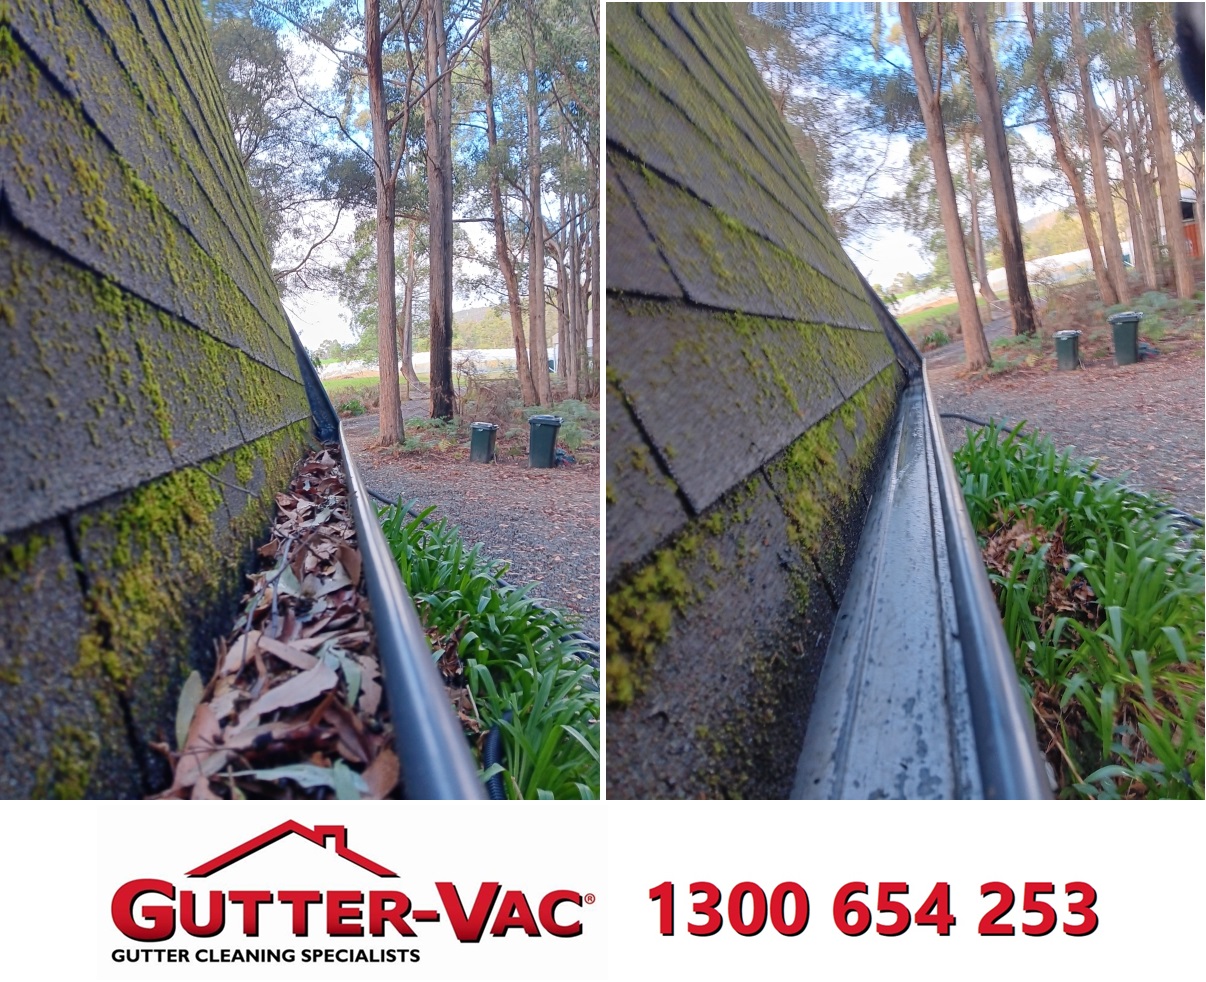 When should I get my gutters cleaned?